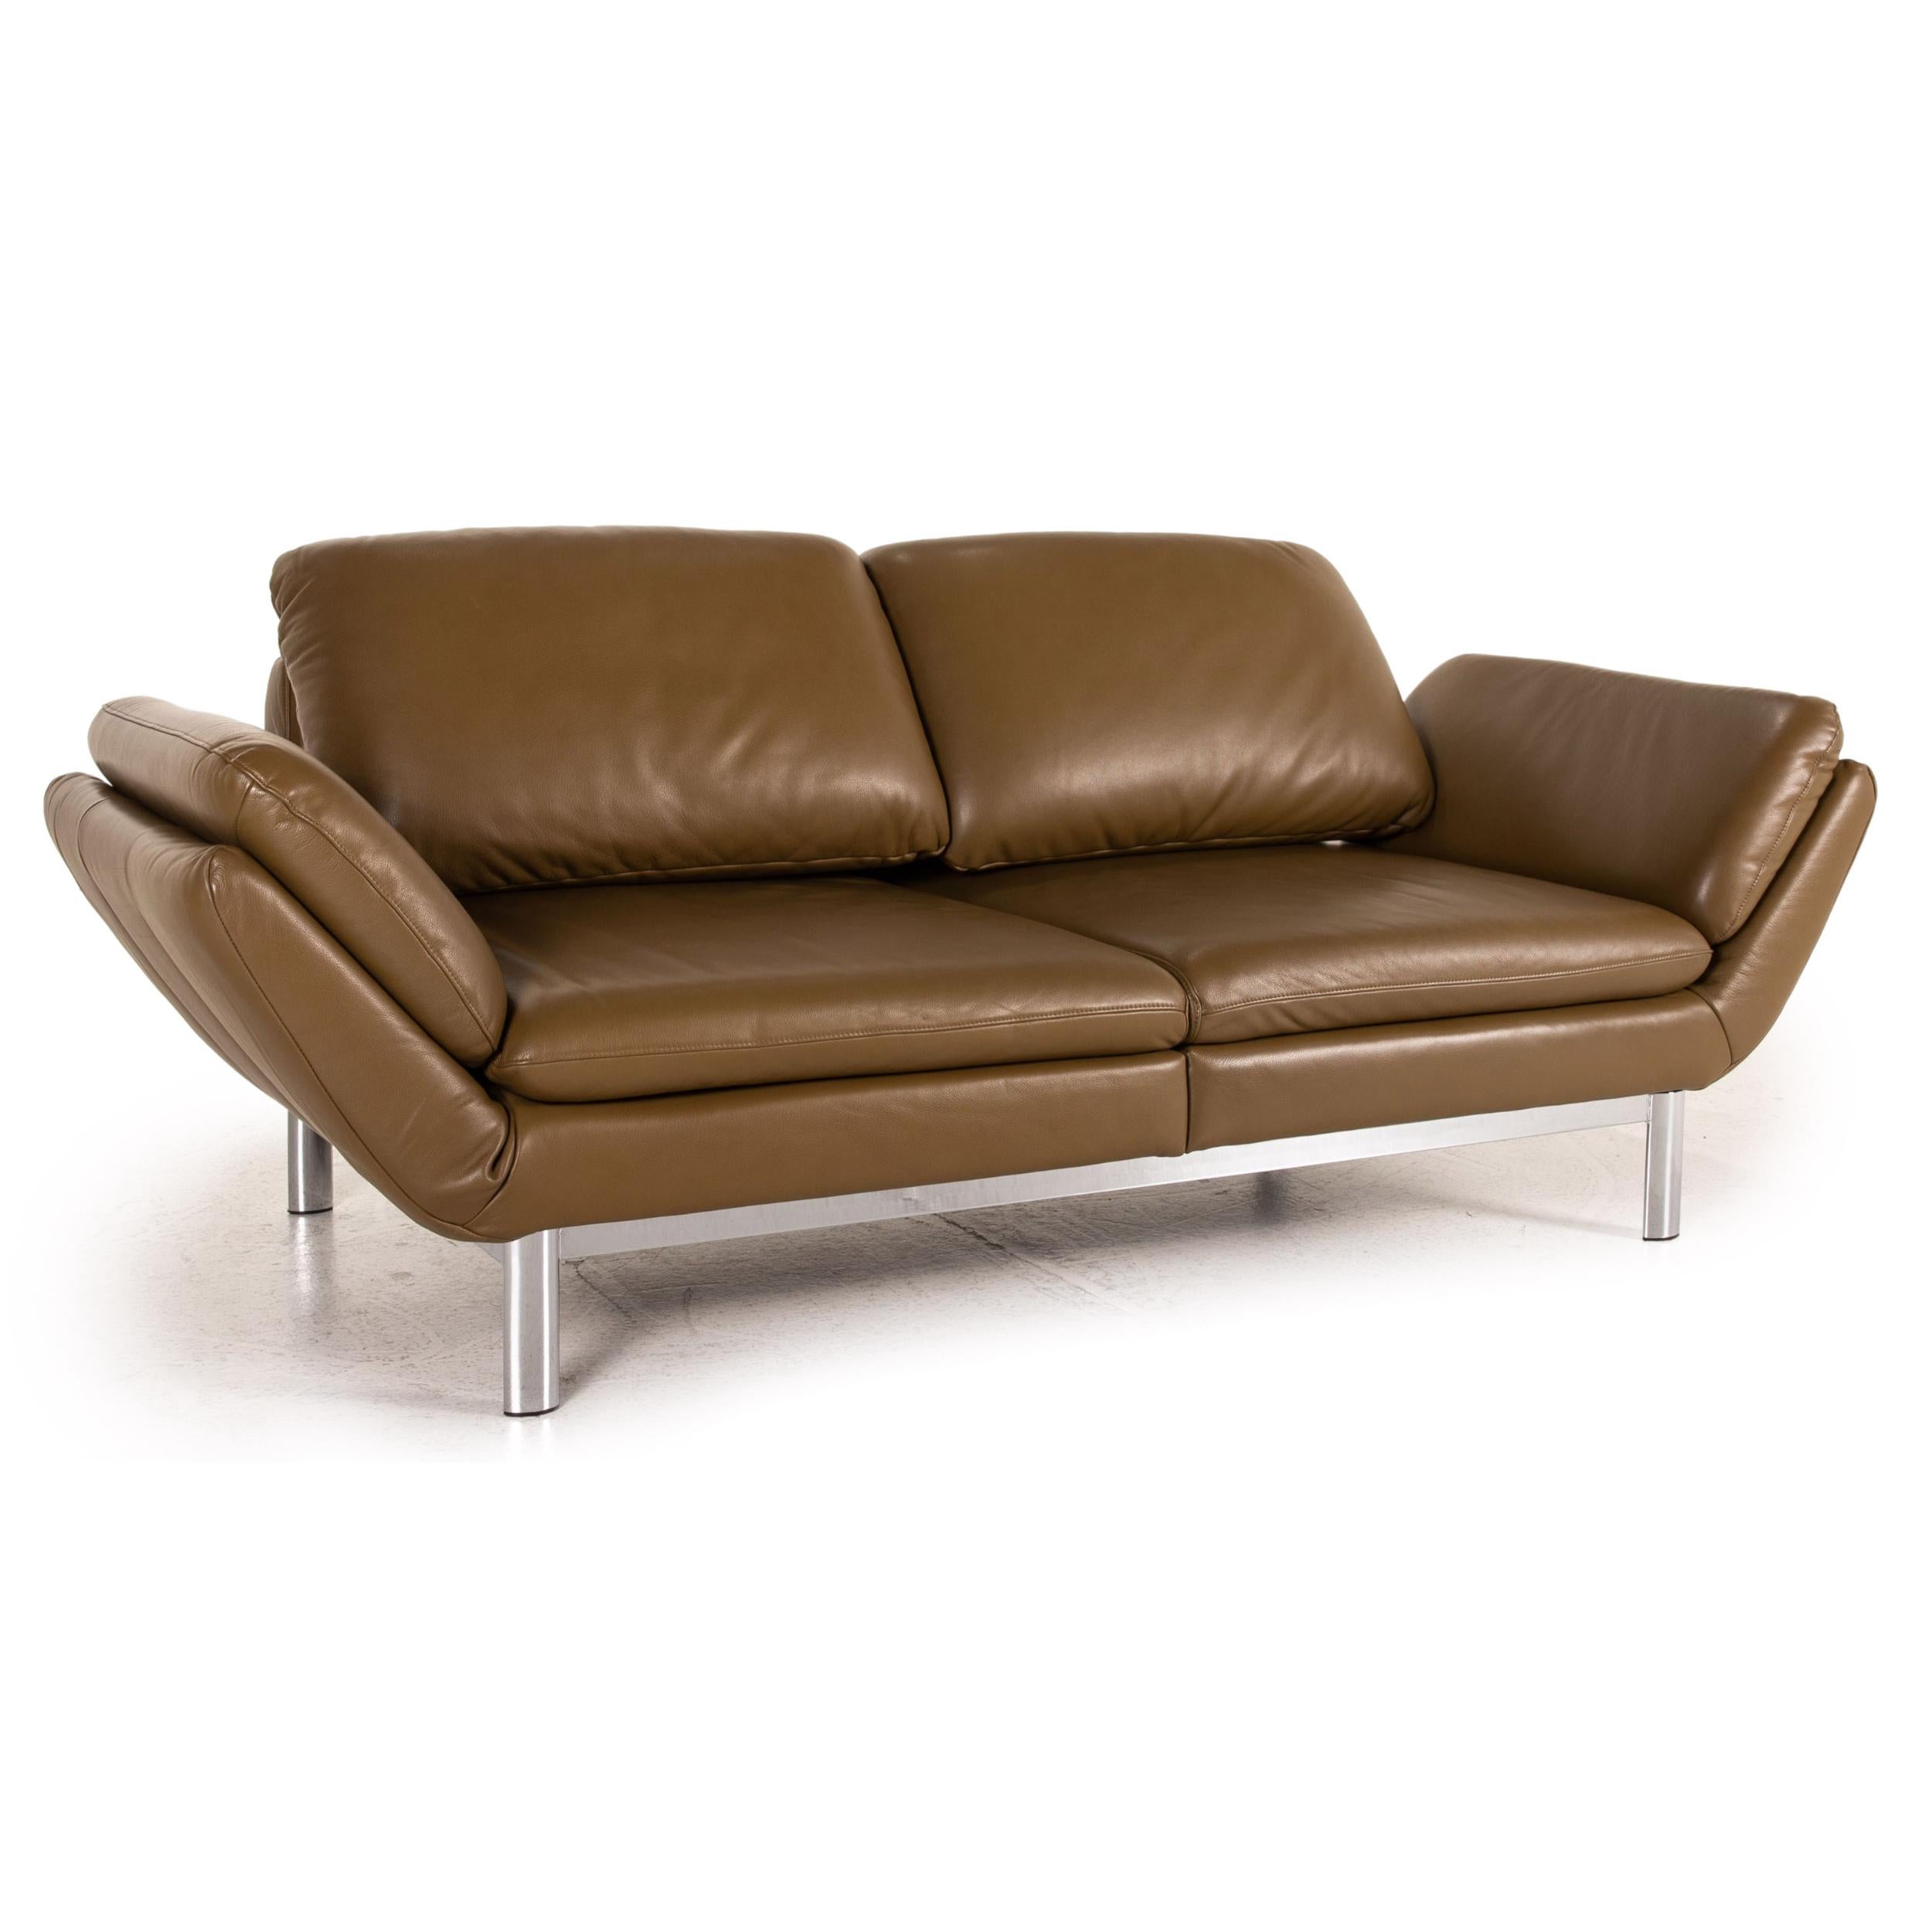 Contemporary Musterring MR 675 Leather Sofa Green Olive Two-Seater Function Relax Function